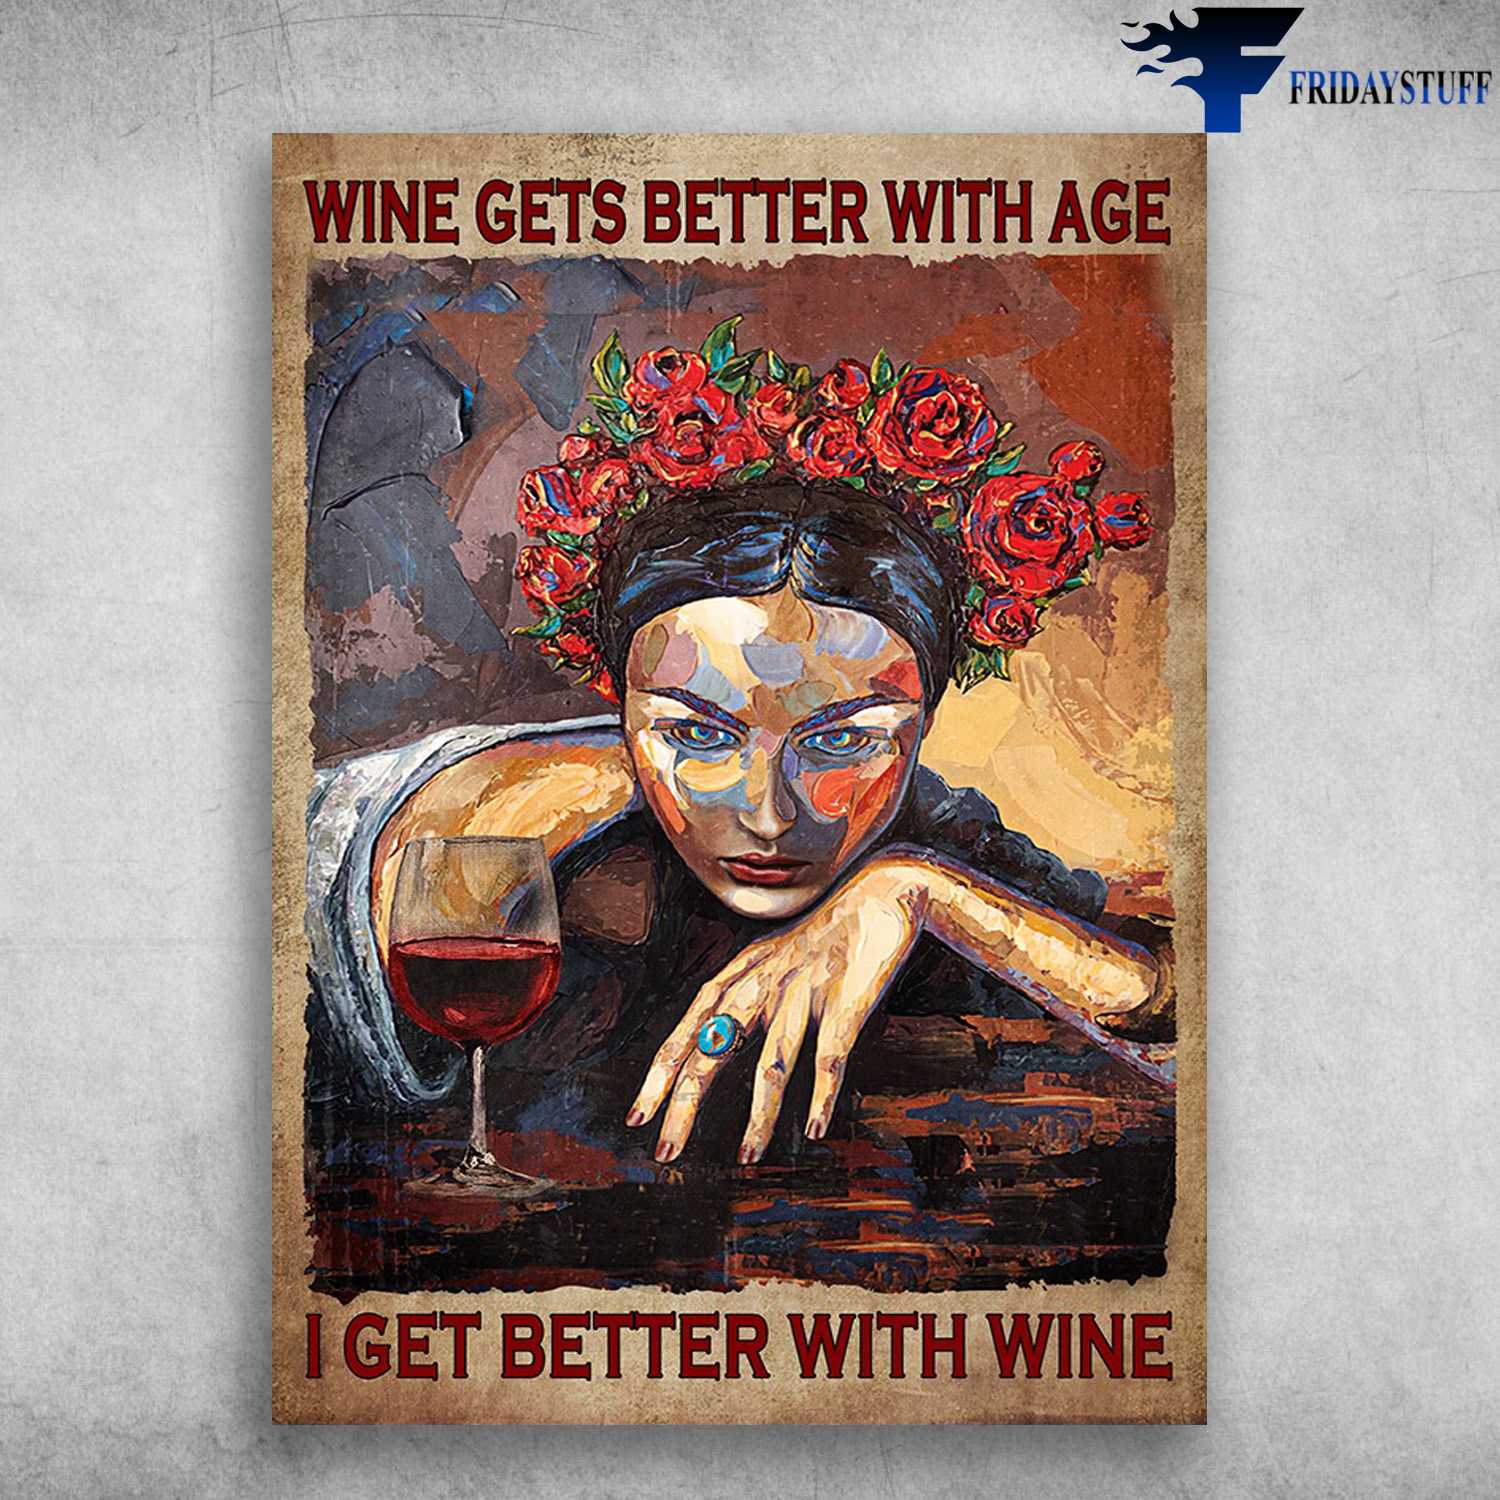 Lady Wine Flower - Wine Gets Better With Age, I Get Better With Wine